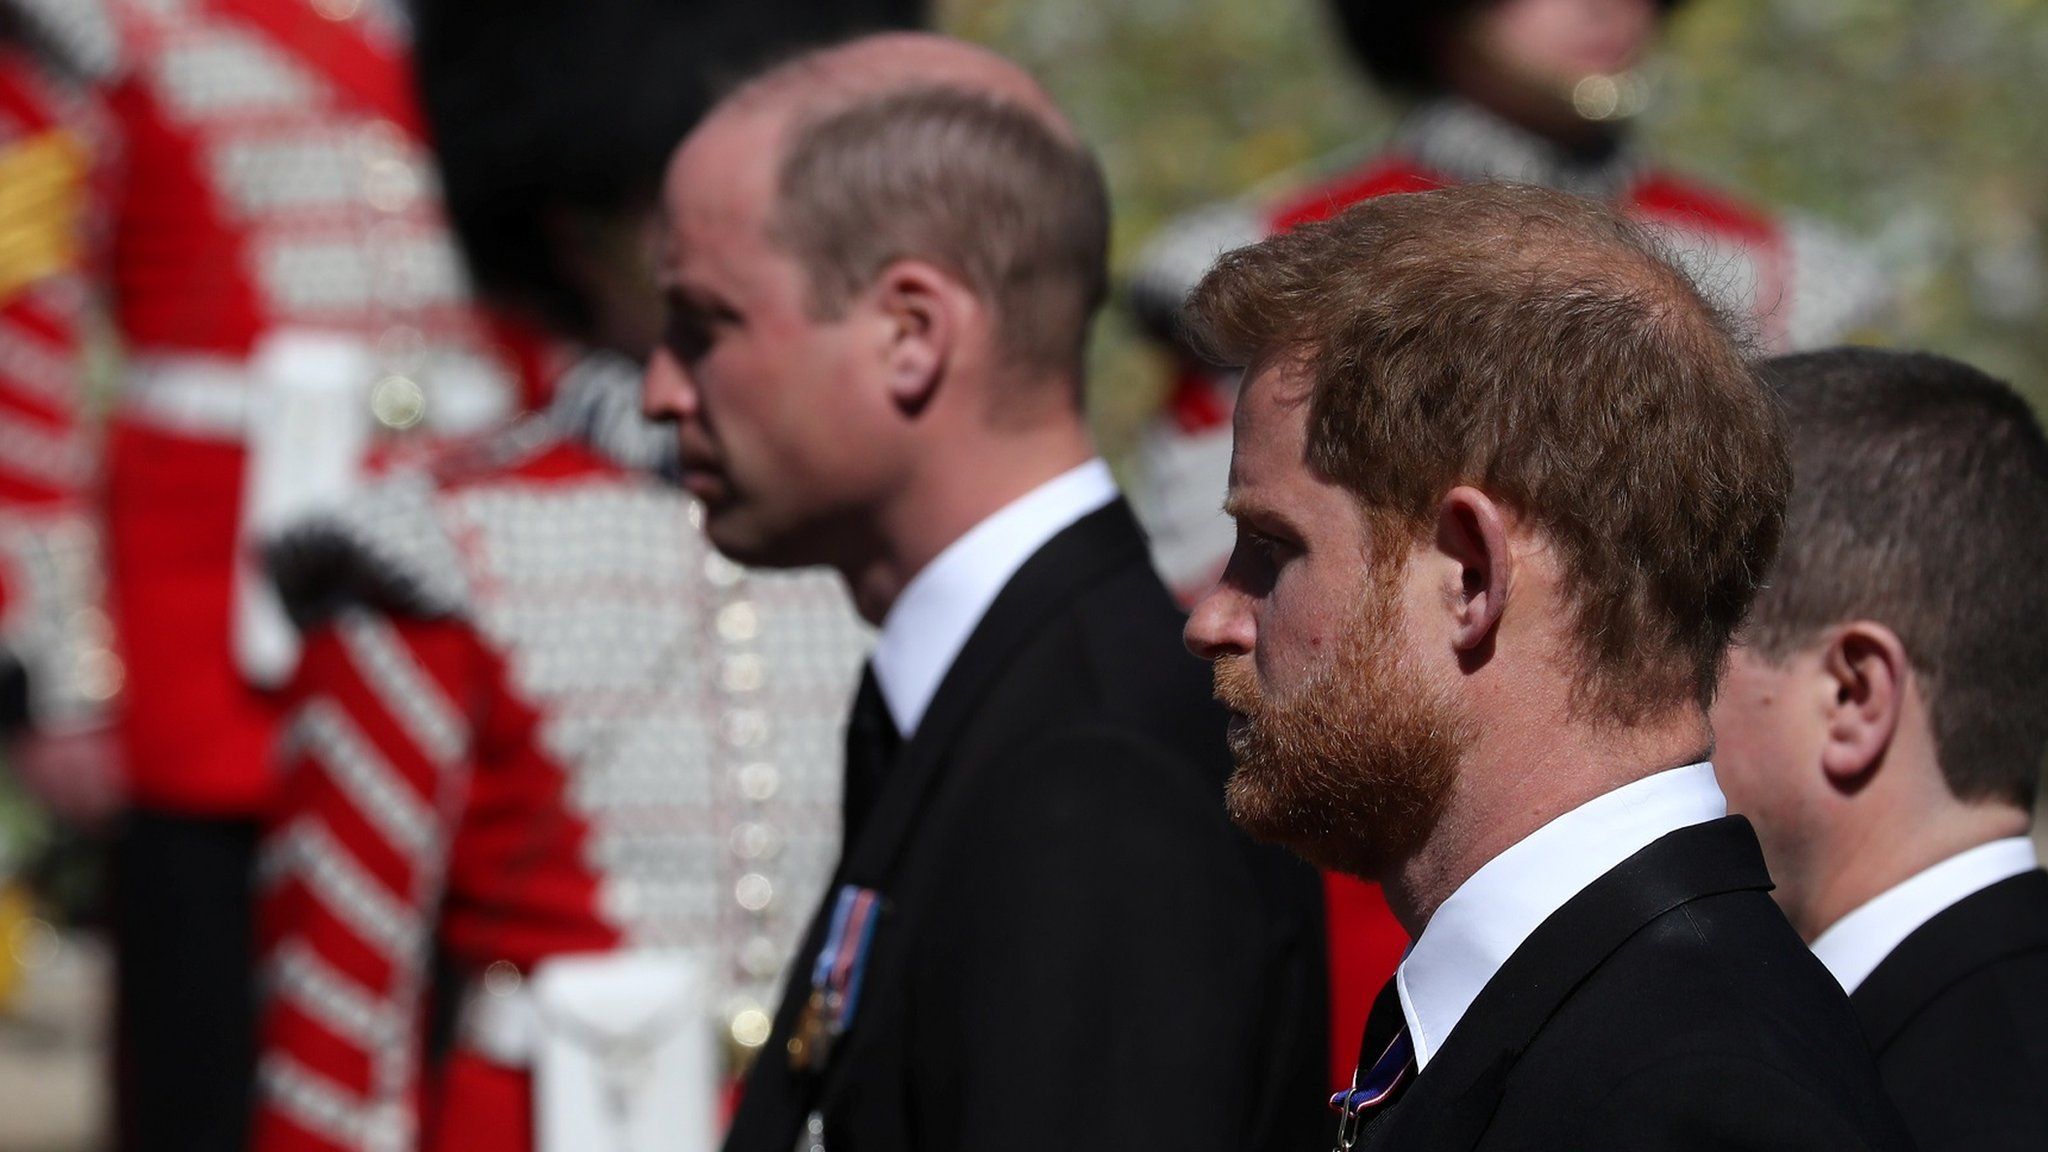 The Duke of Cambridge (background, left) and the Duke of Sussex